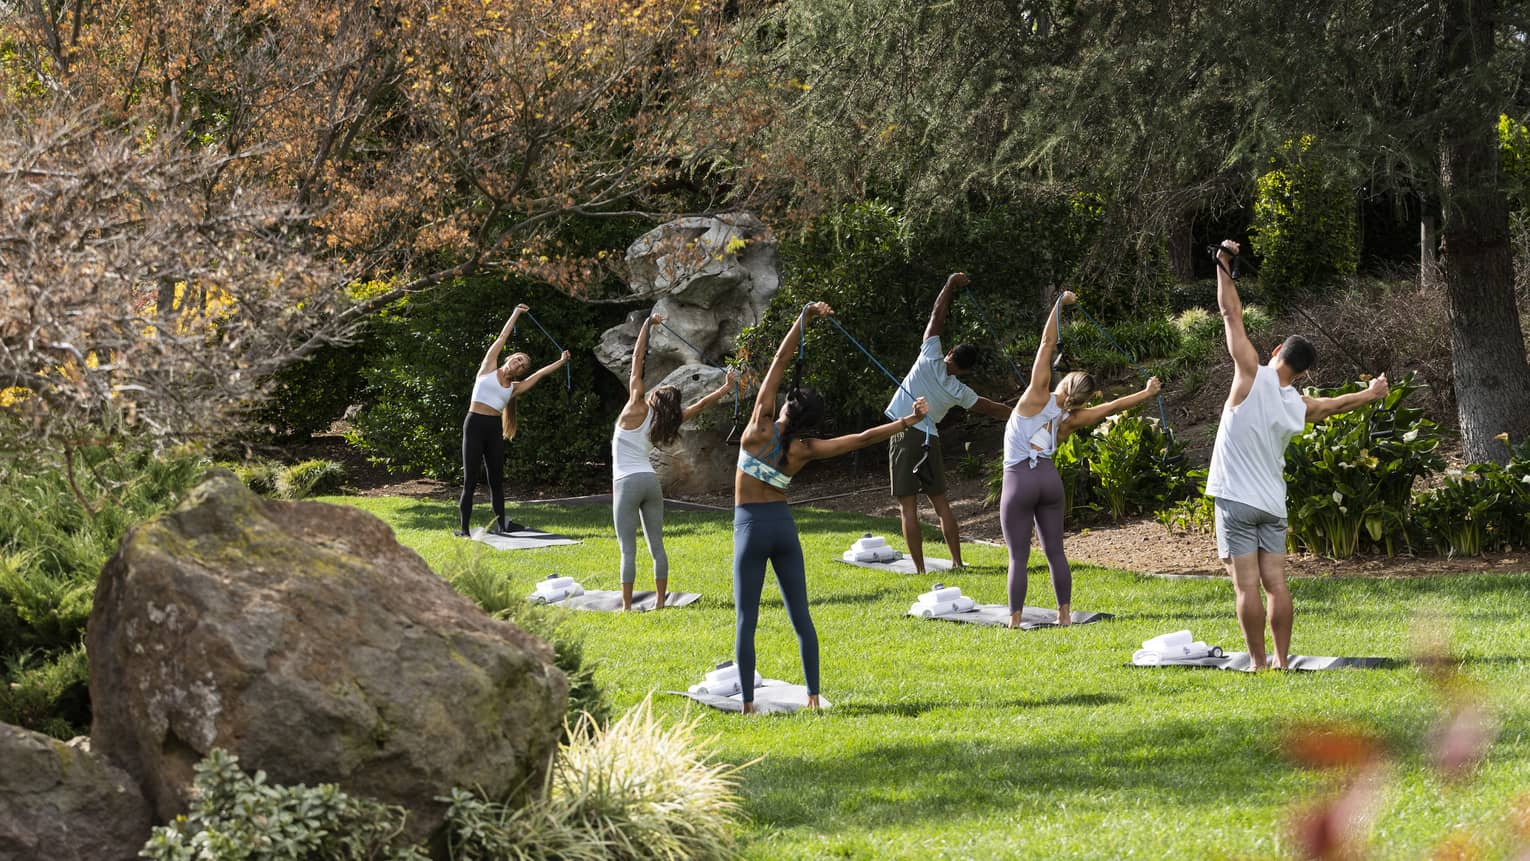 A group of people doing yoga outside on grass surrounded by trees.